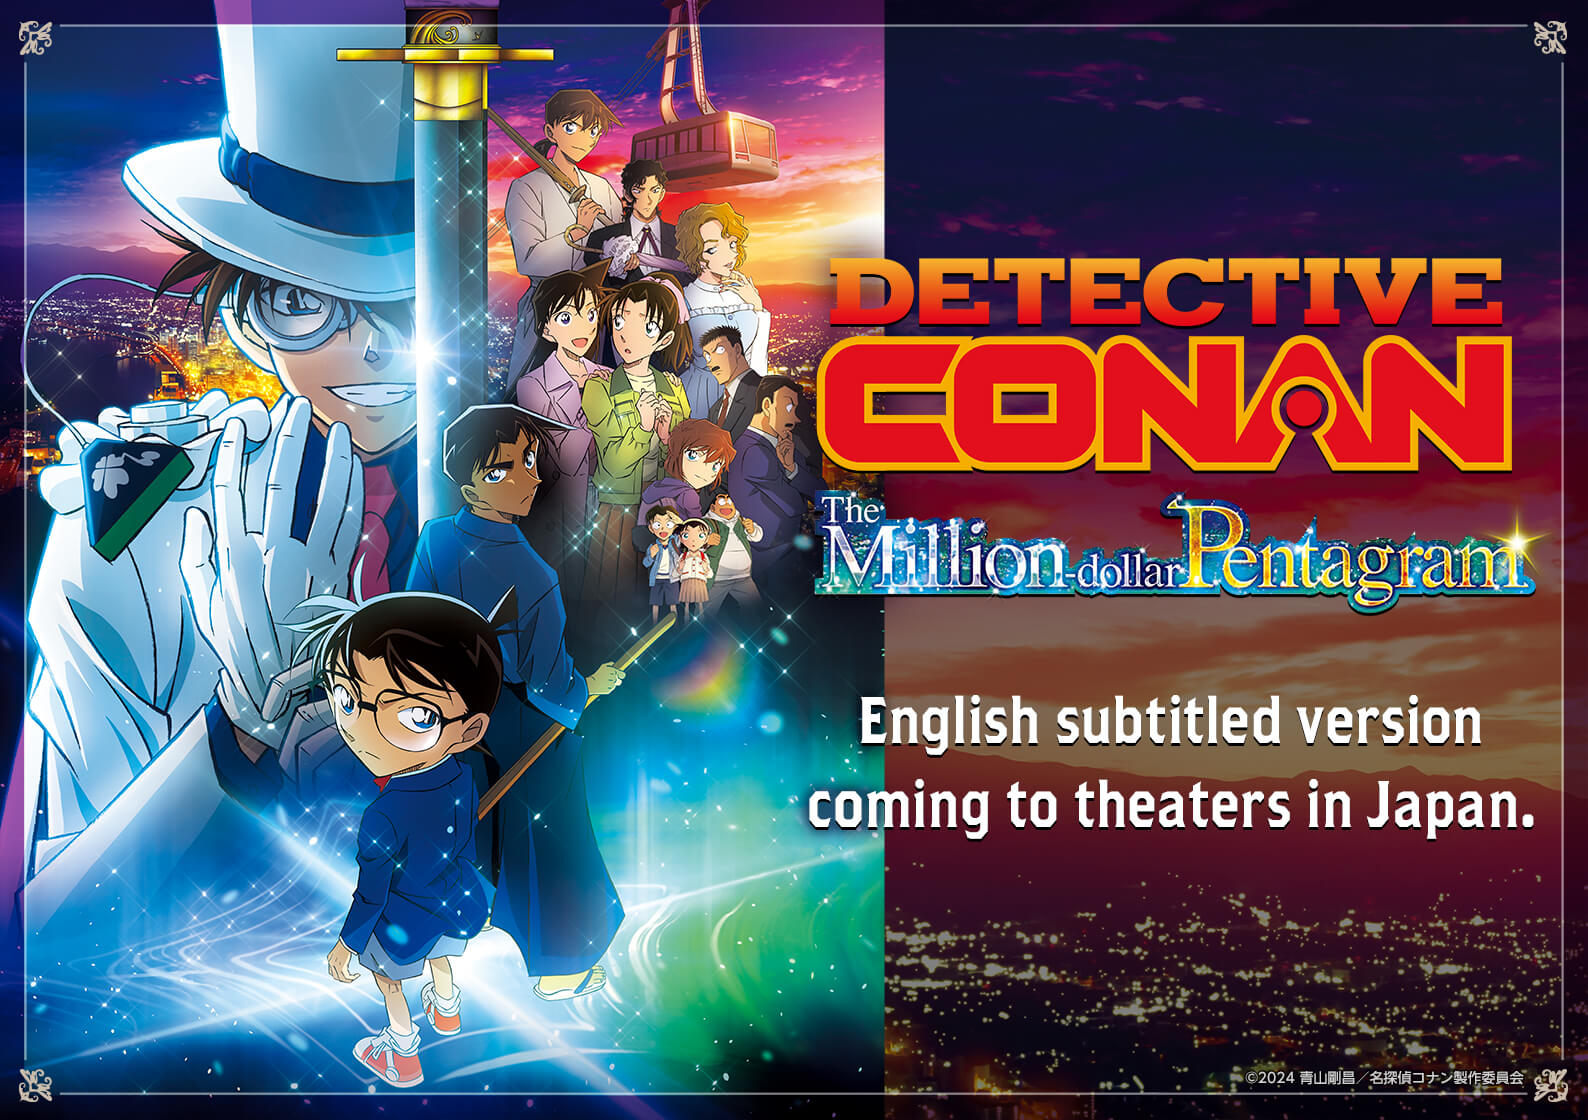 DetectiveConan The Million-dollar Pentagram english subtitled version coming to theaters in Japan.